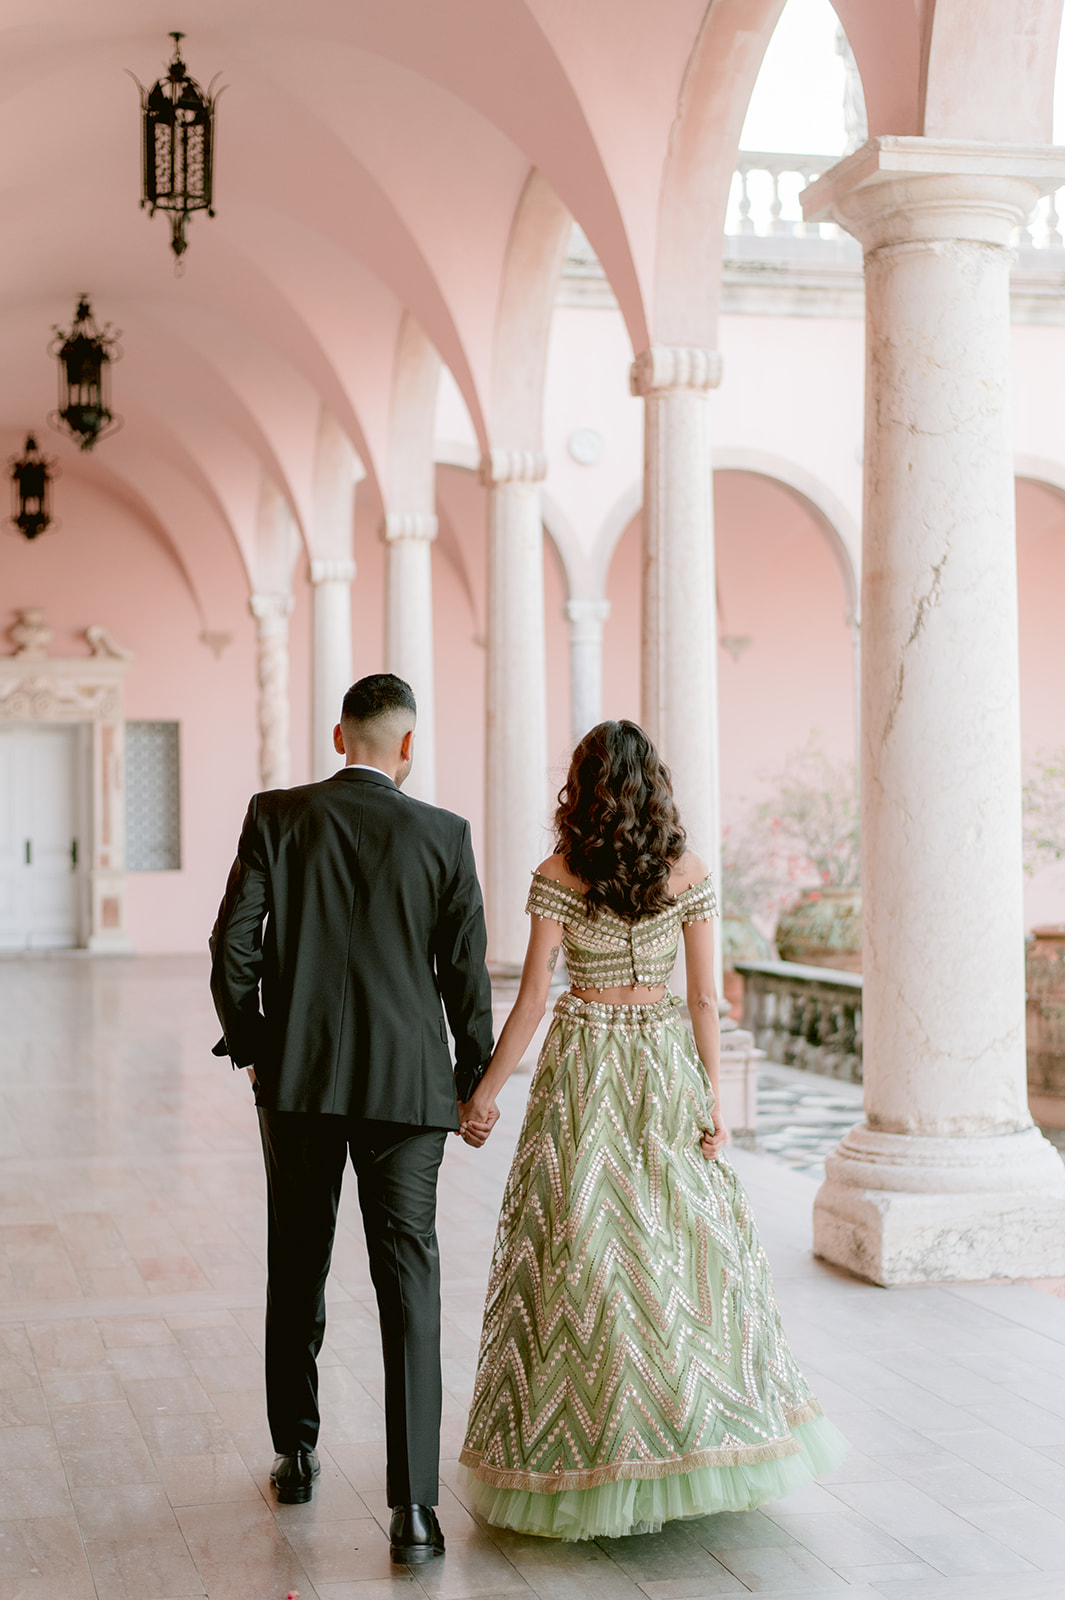 "Ringling Museum engagement session with stunning pastel green and gold Indian attire"
